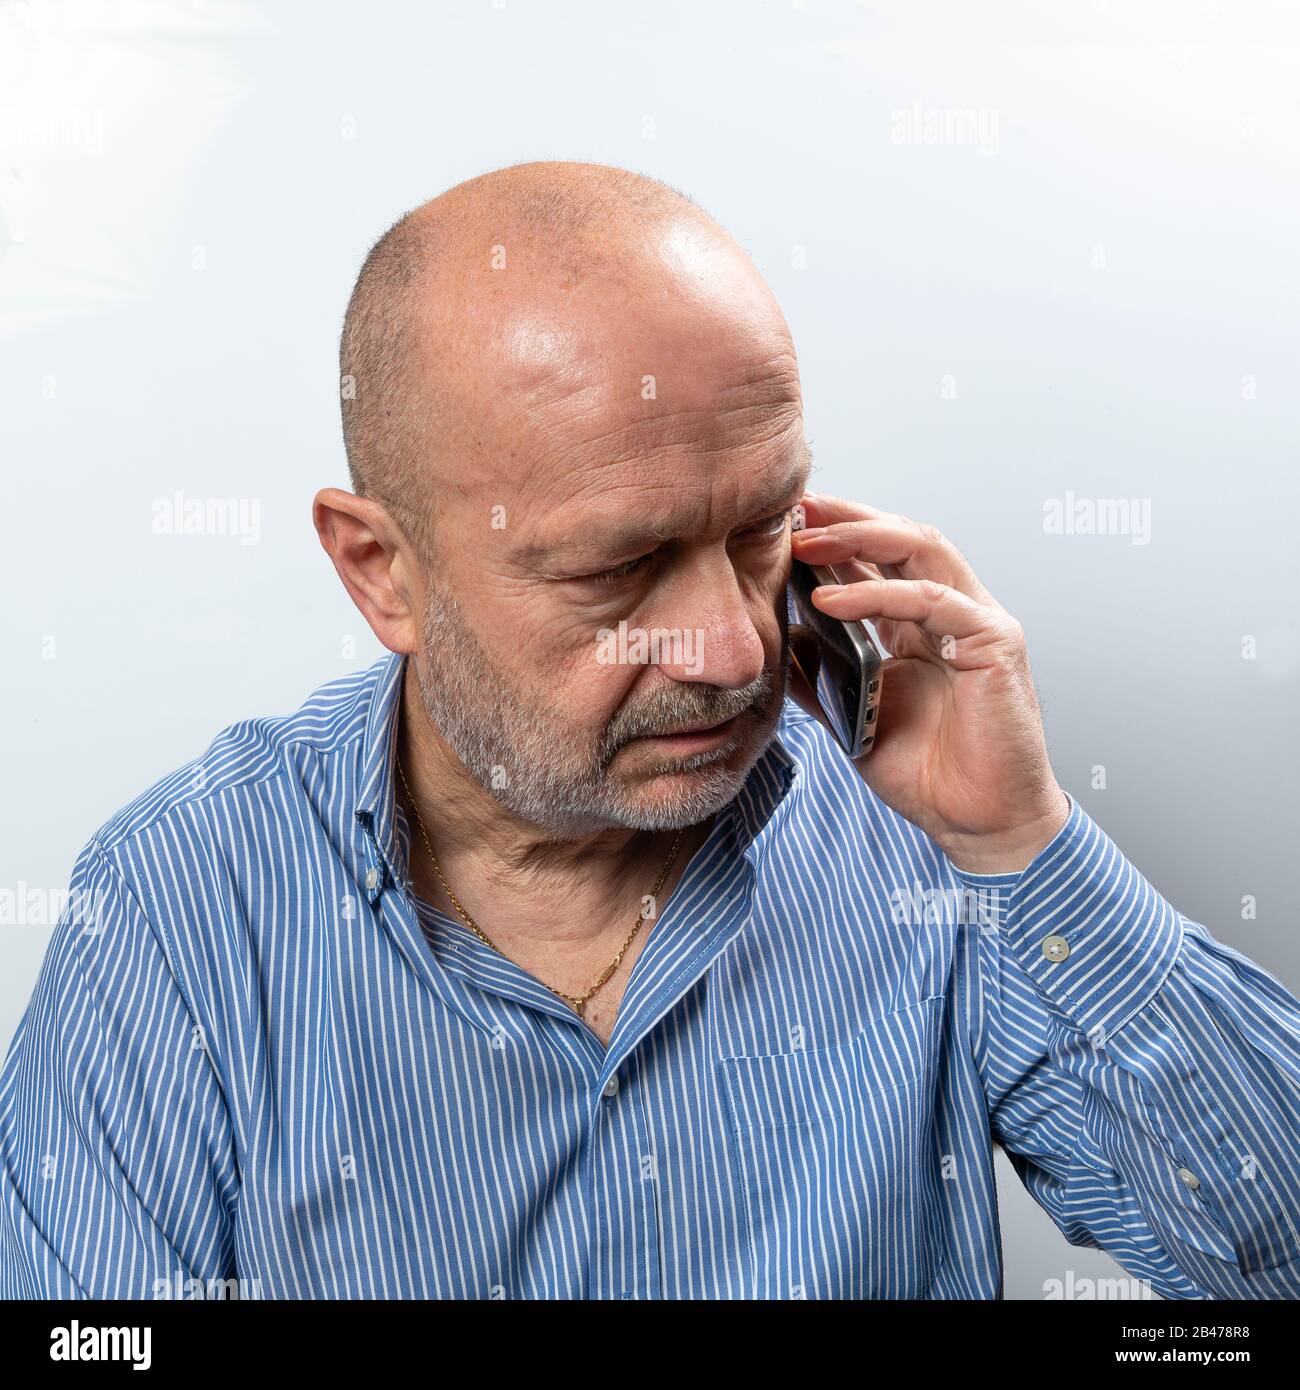 A middle-aged man argues during a cell phone conversation Stock Photo